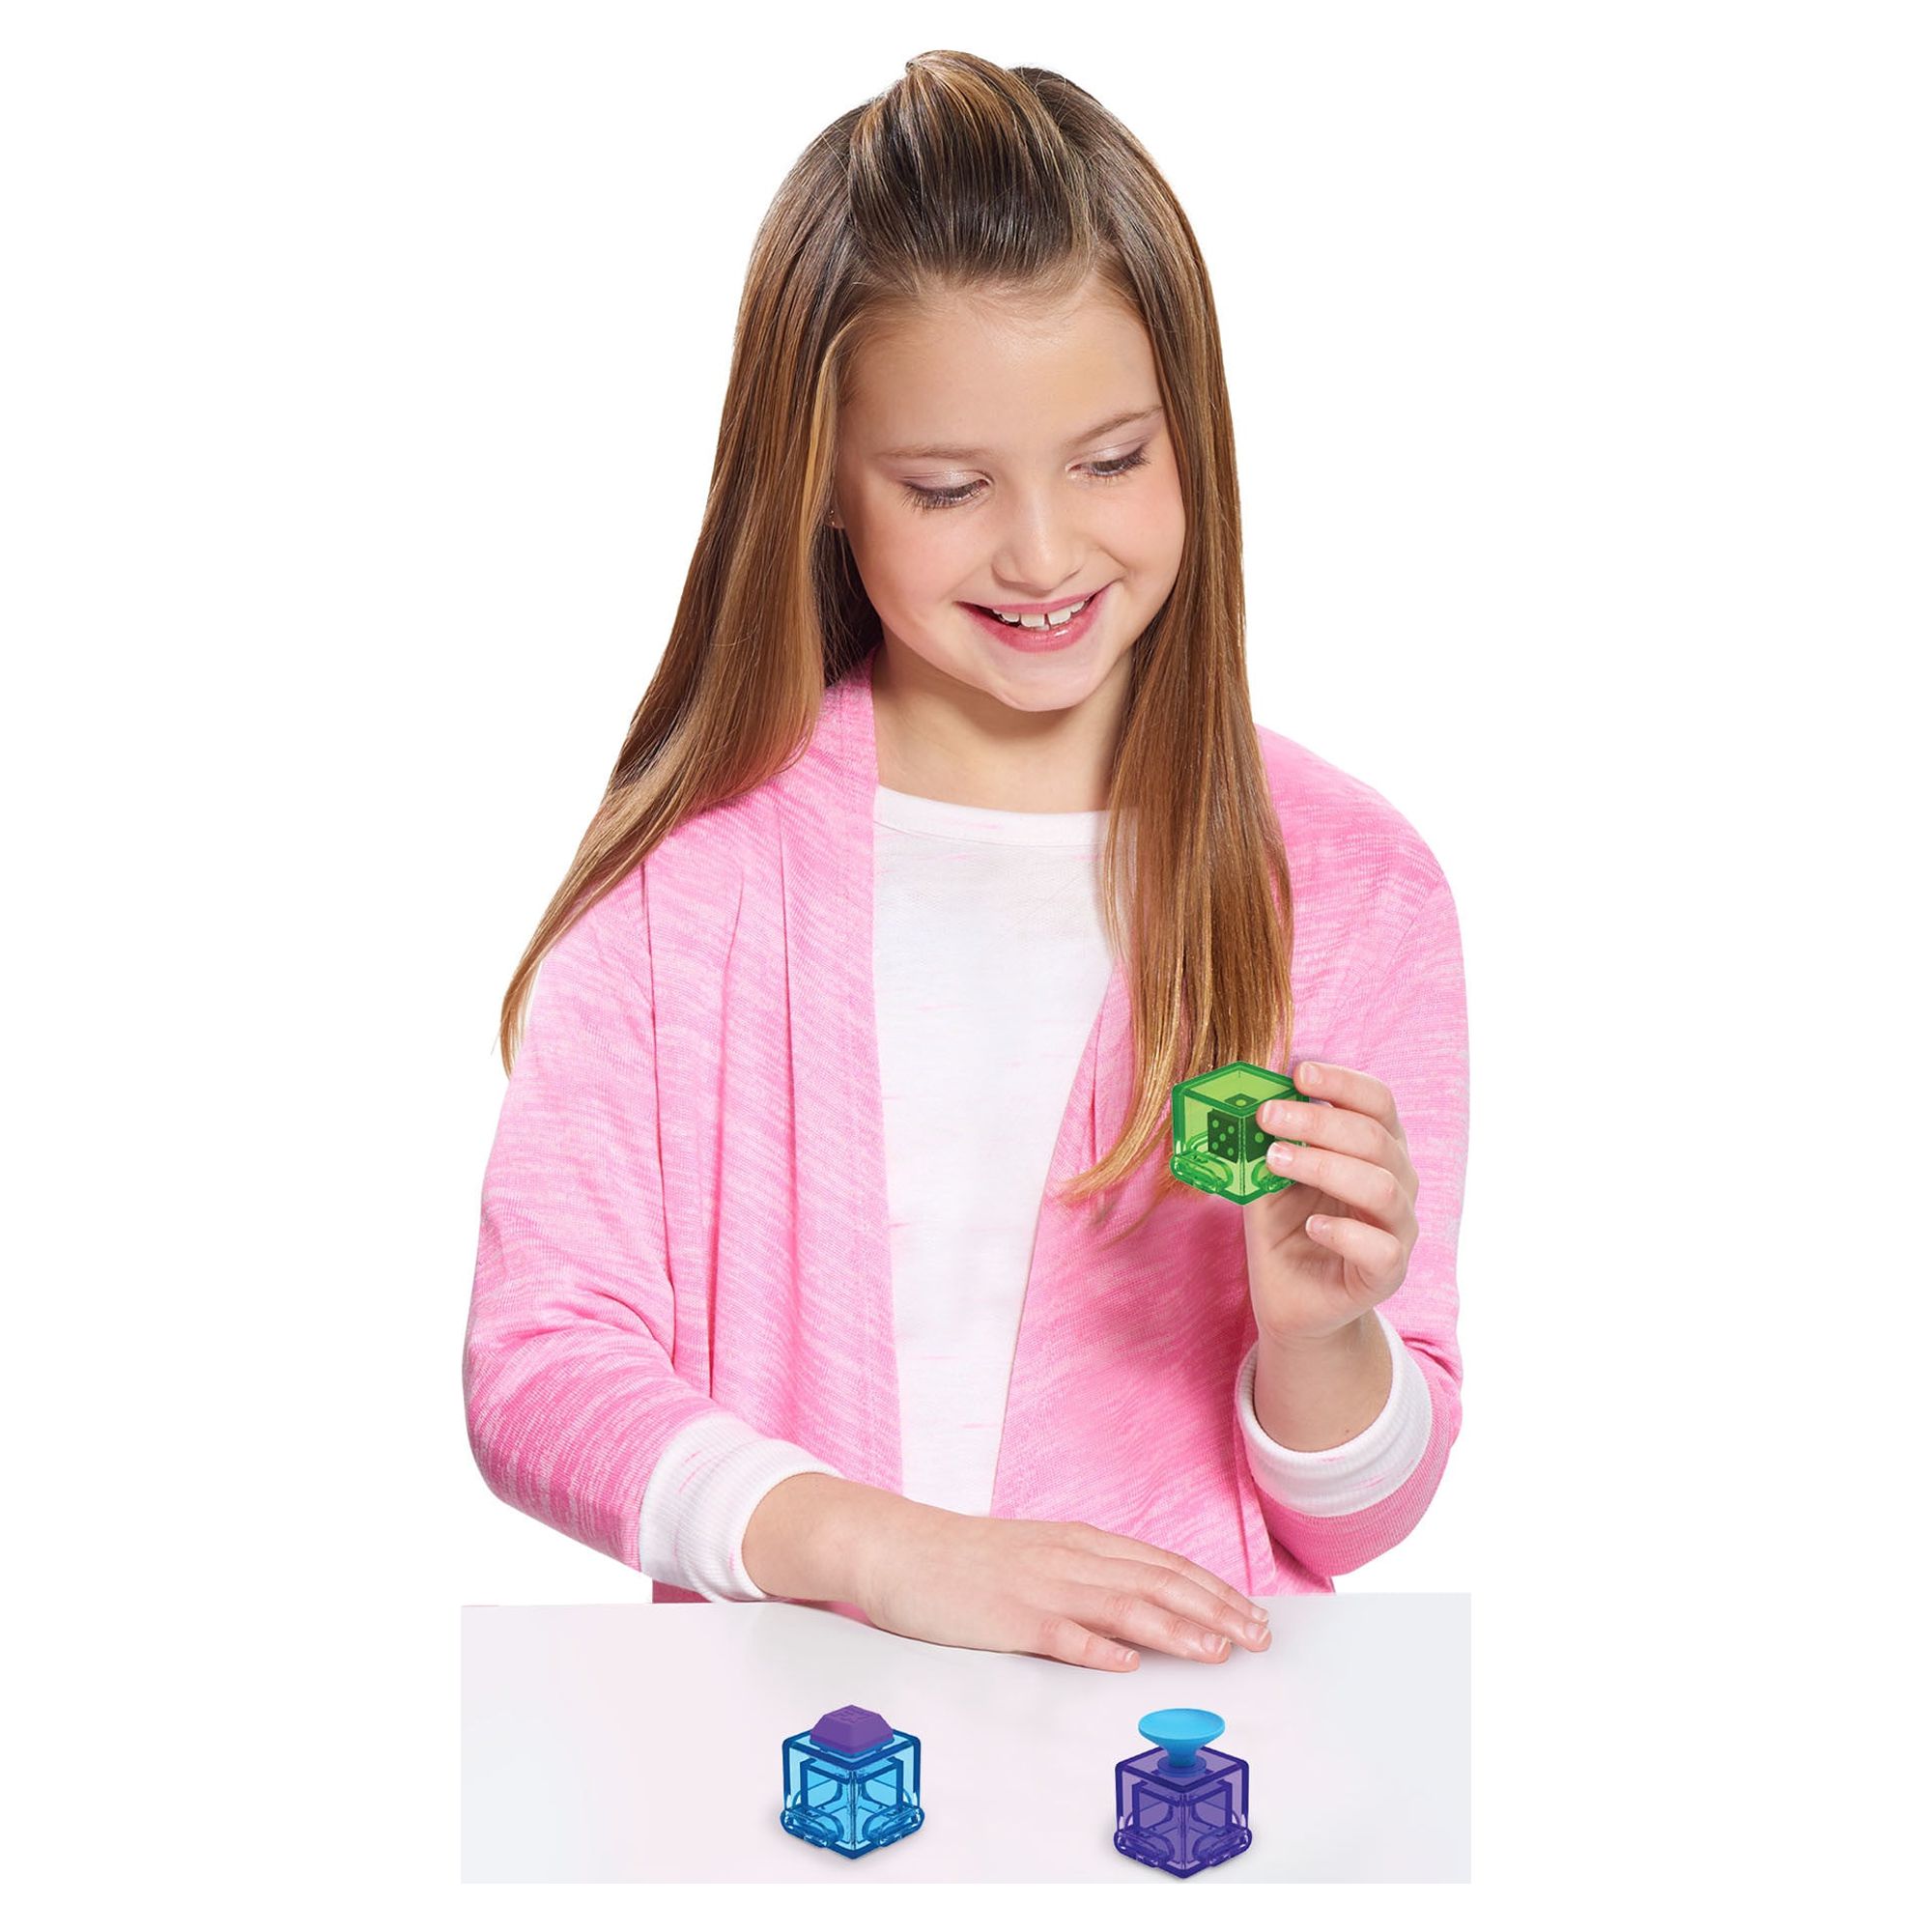 Sensory FX ASMR Dice, Includes 3 Dice, Styles May Vary, Fidget and Stress Toys for Kids and Adults, Create Unique and Soothing Sound Effects,  Kids Toys for Ages 4 Up, Gifts and Presents - image 2 of 6